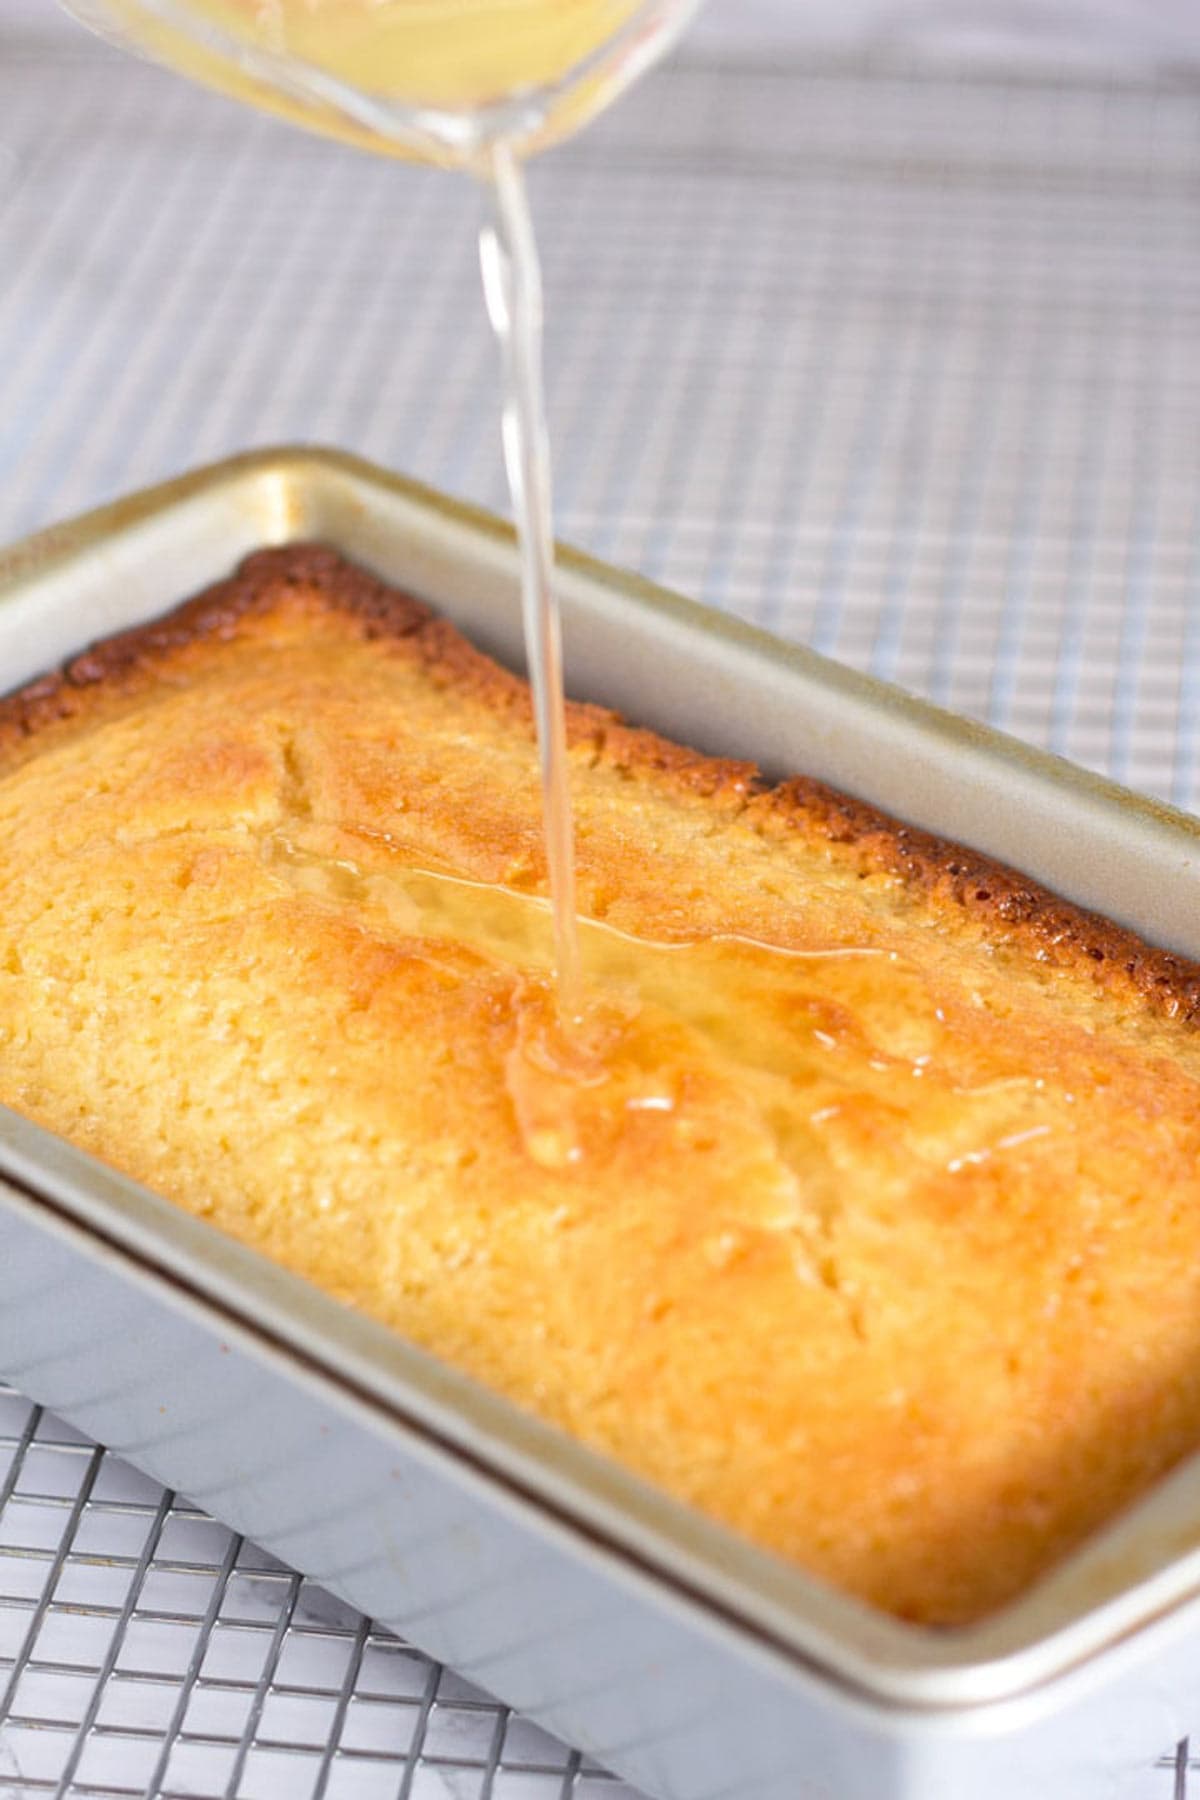 Pouring lemon syrup onto lemon loaf while it is still in the cake pan.